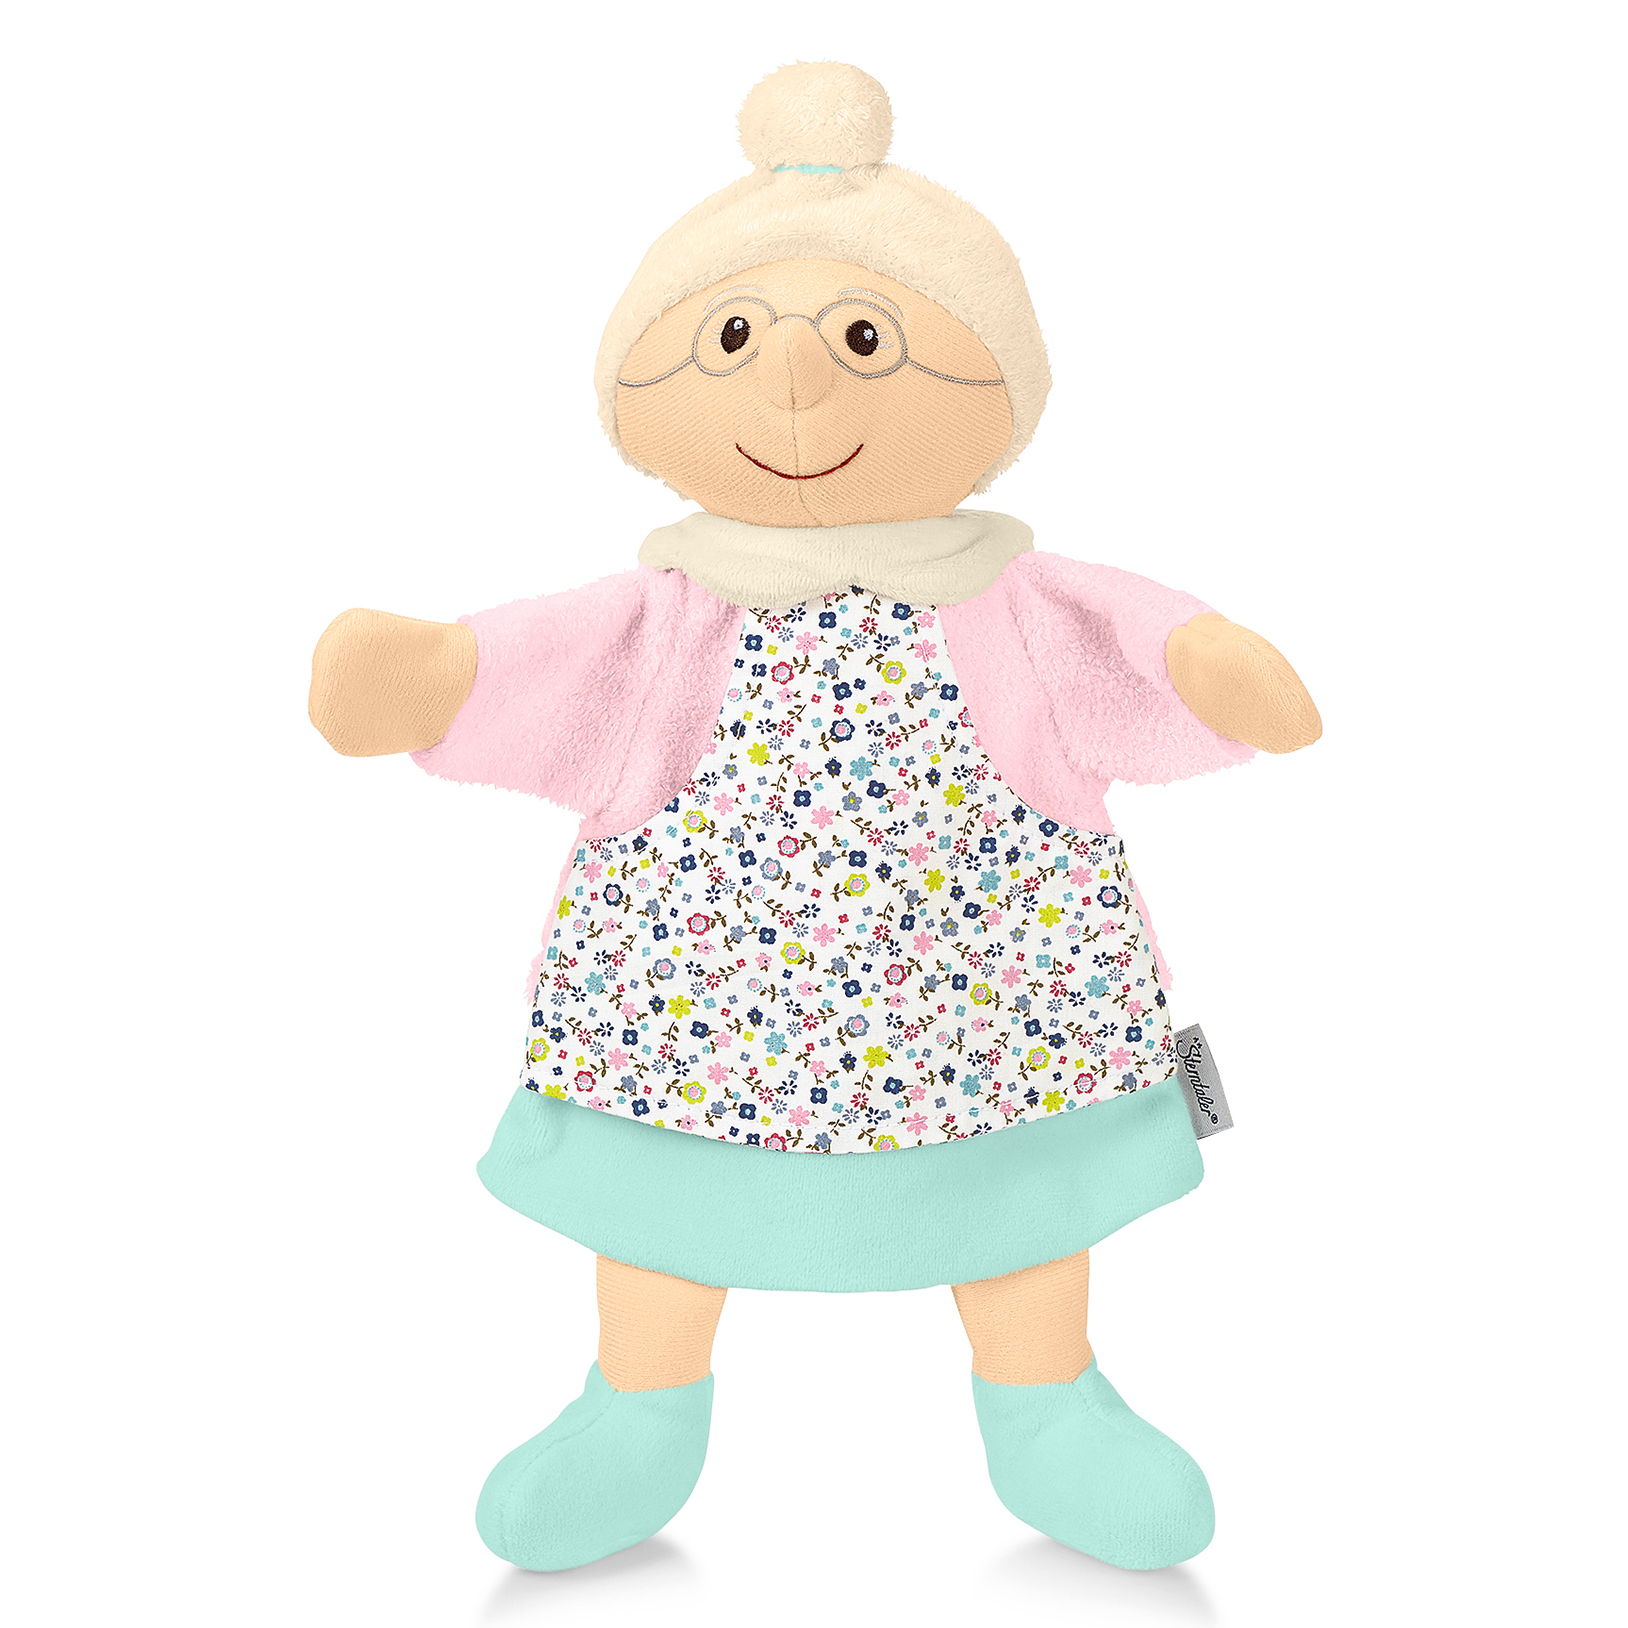 Grandma - hand puppet for babies by Sterntaler